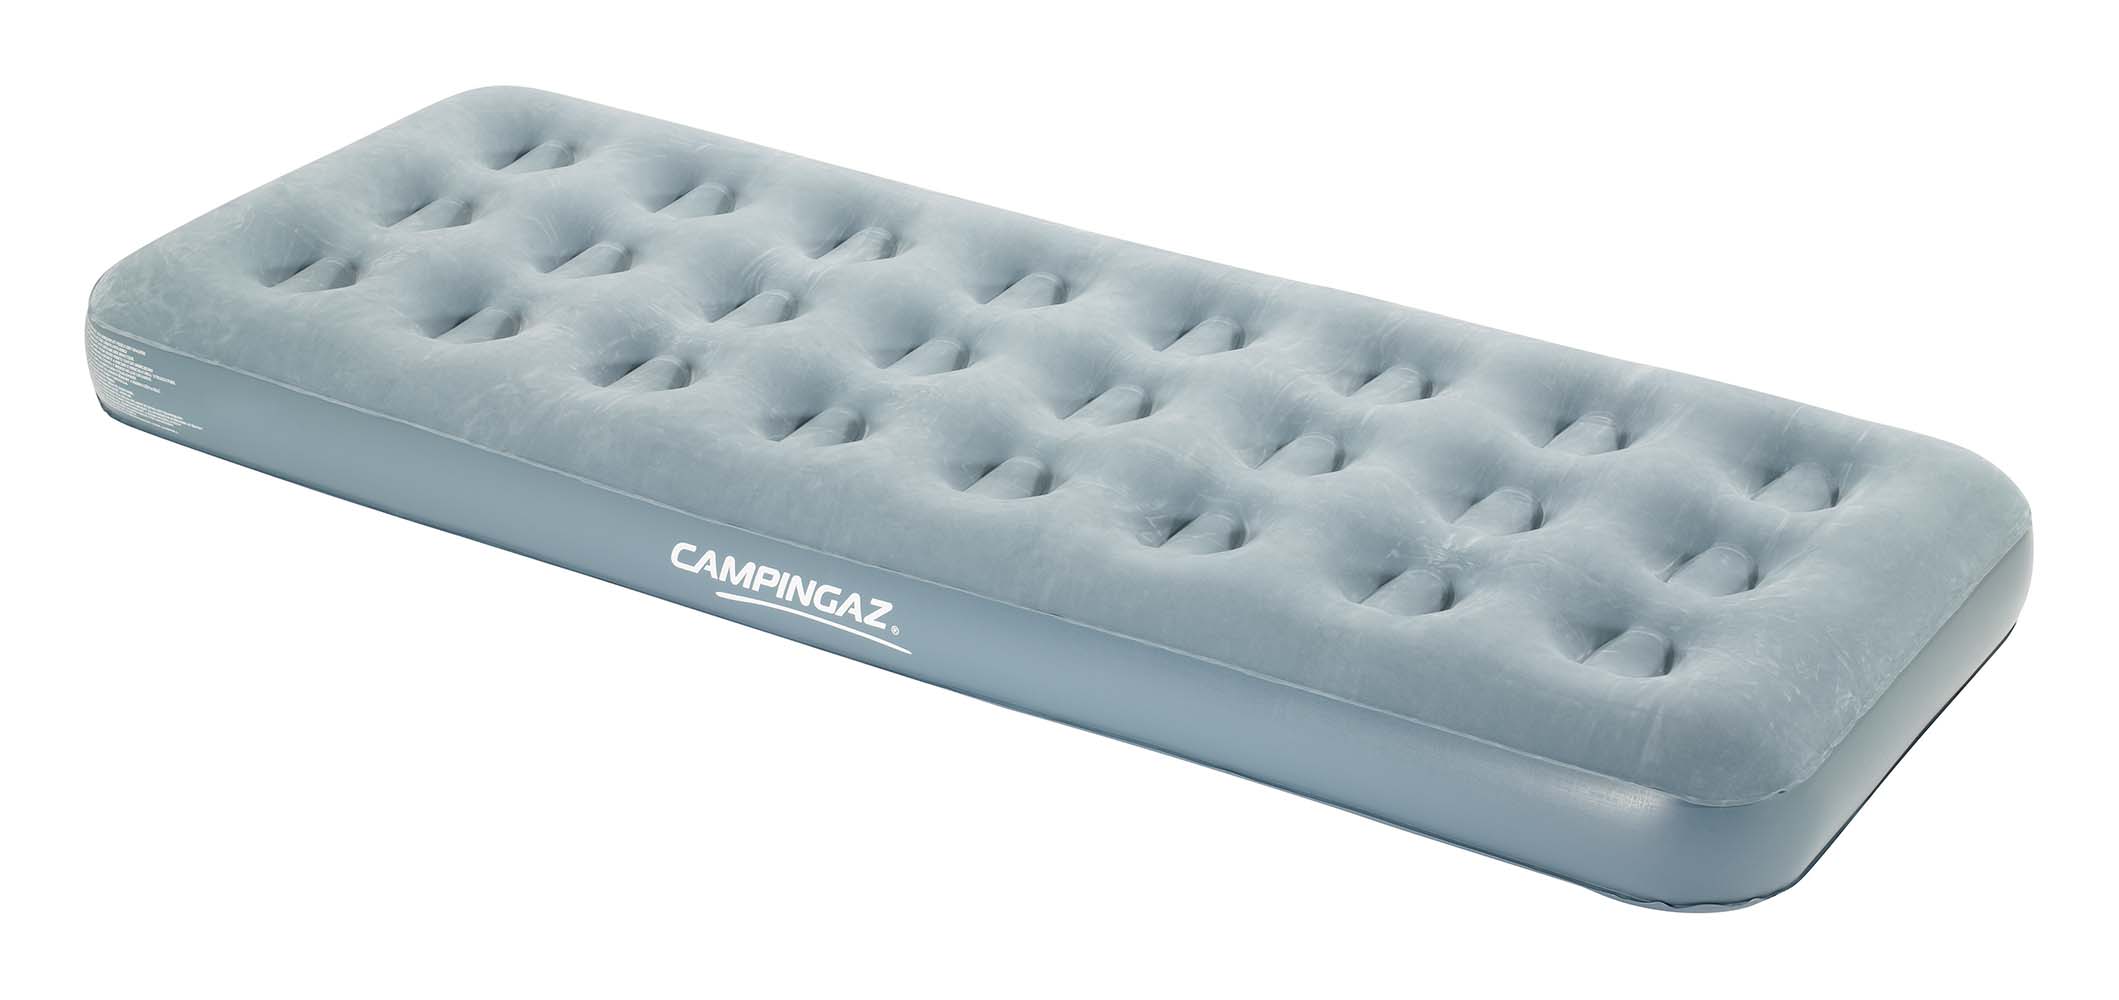 8805482 Extra long and comfortable inflatable bed. Suitable for indoor and outdoor use. Made of high-quality PVC without plasticisers. The air mattress therefore has a higher resistance to leaks, is extra strong, springy and environmentally friendly. In addition, the mattress features a soft top layer and a patented double valve. Delivered with a carry bag.